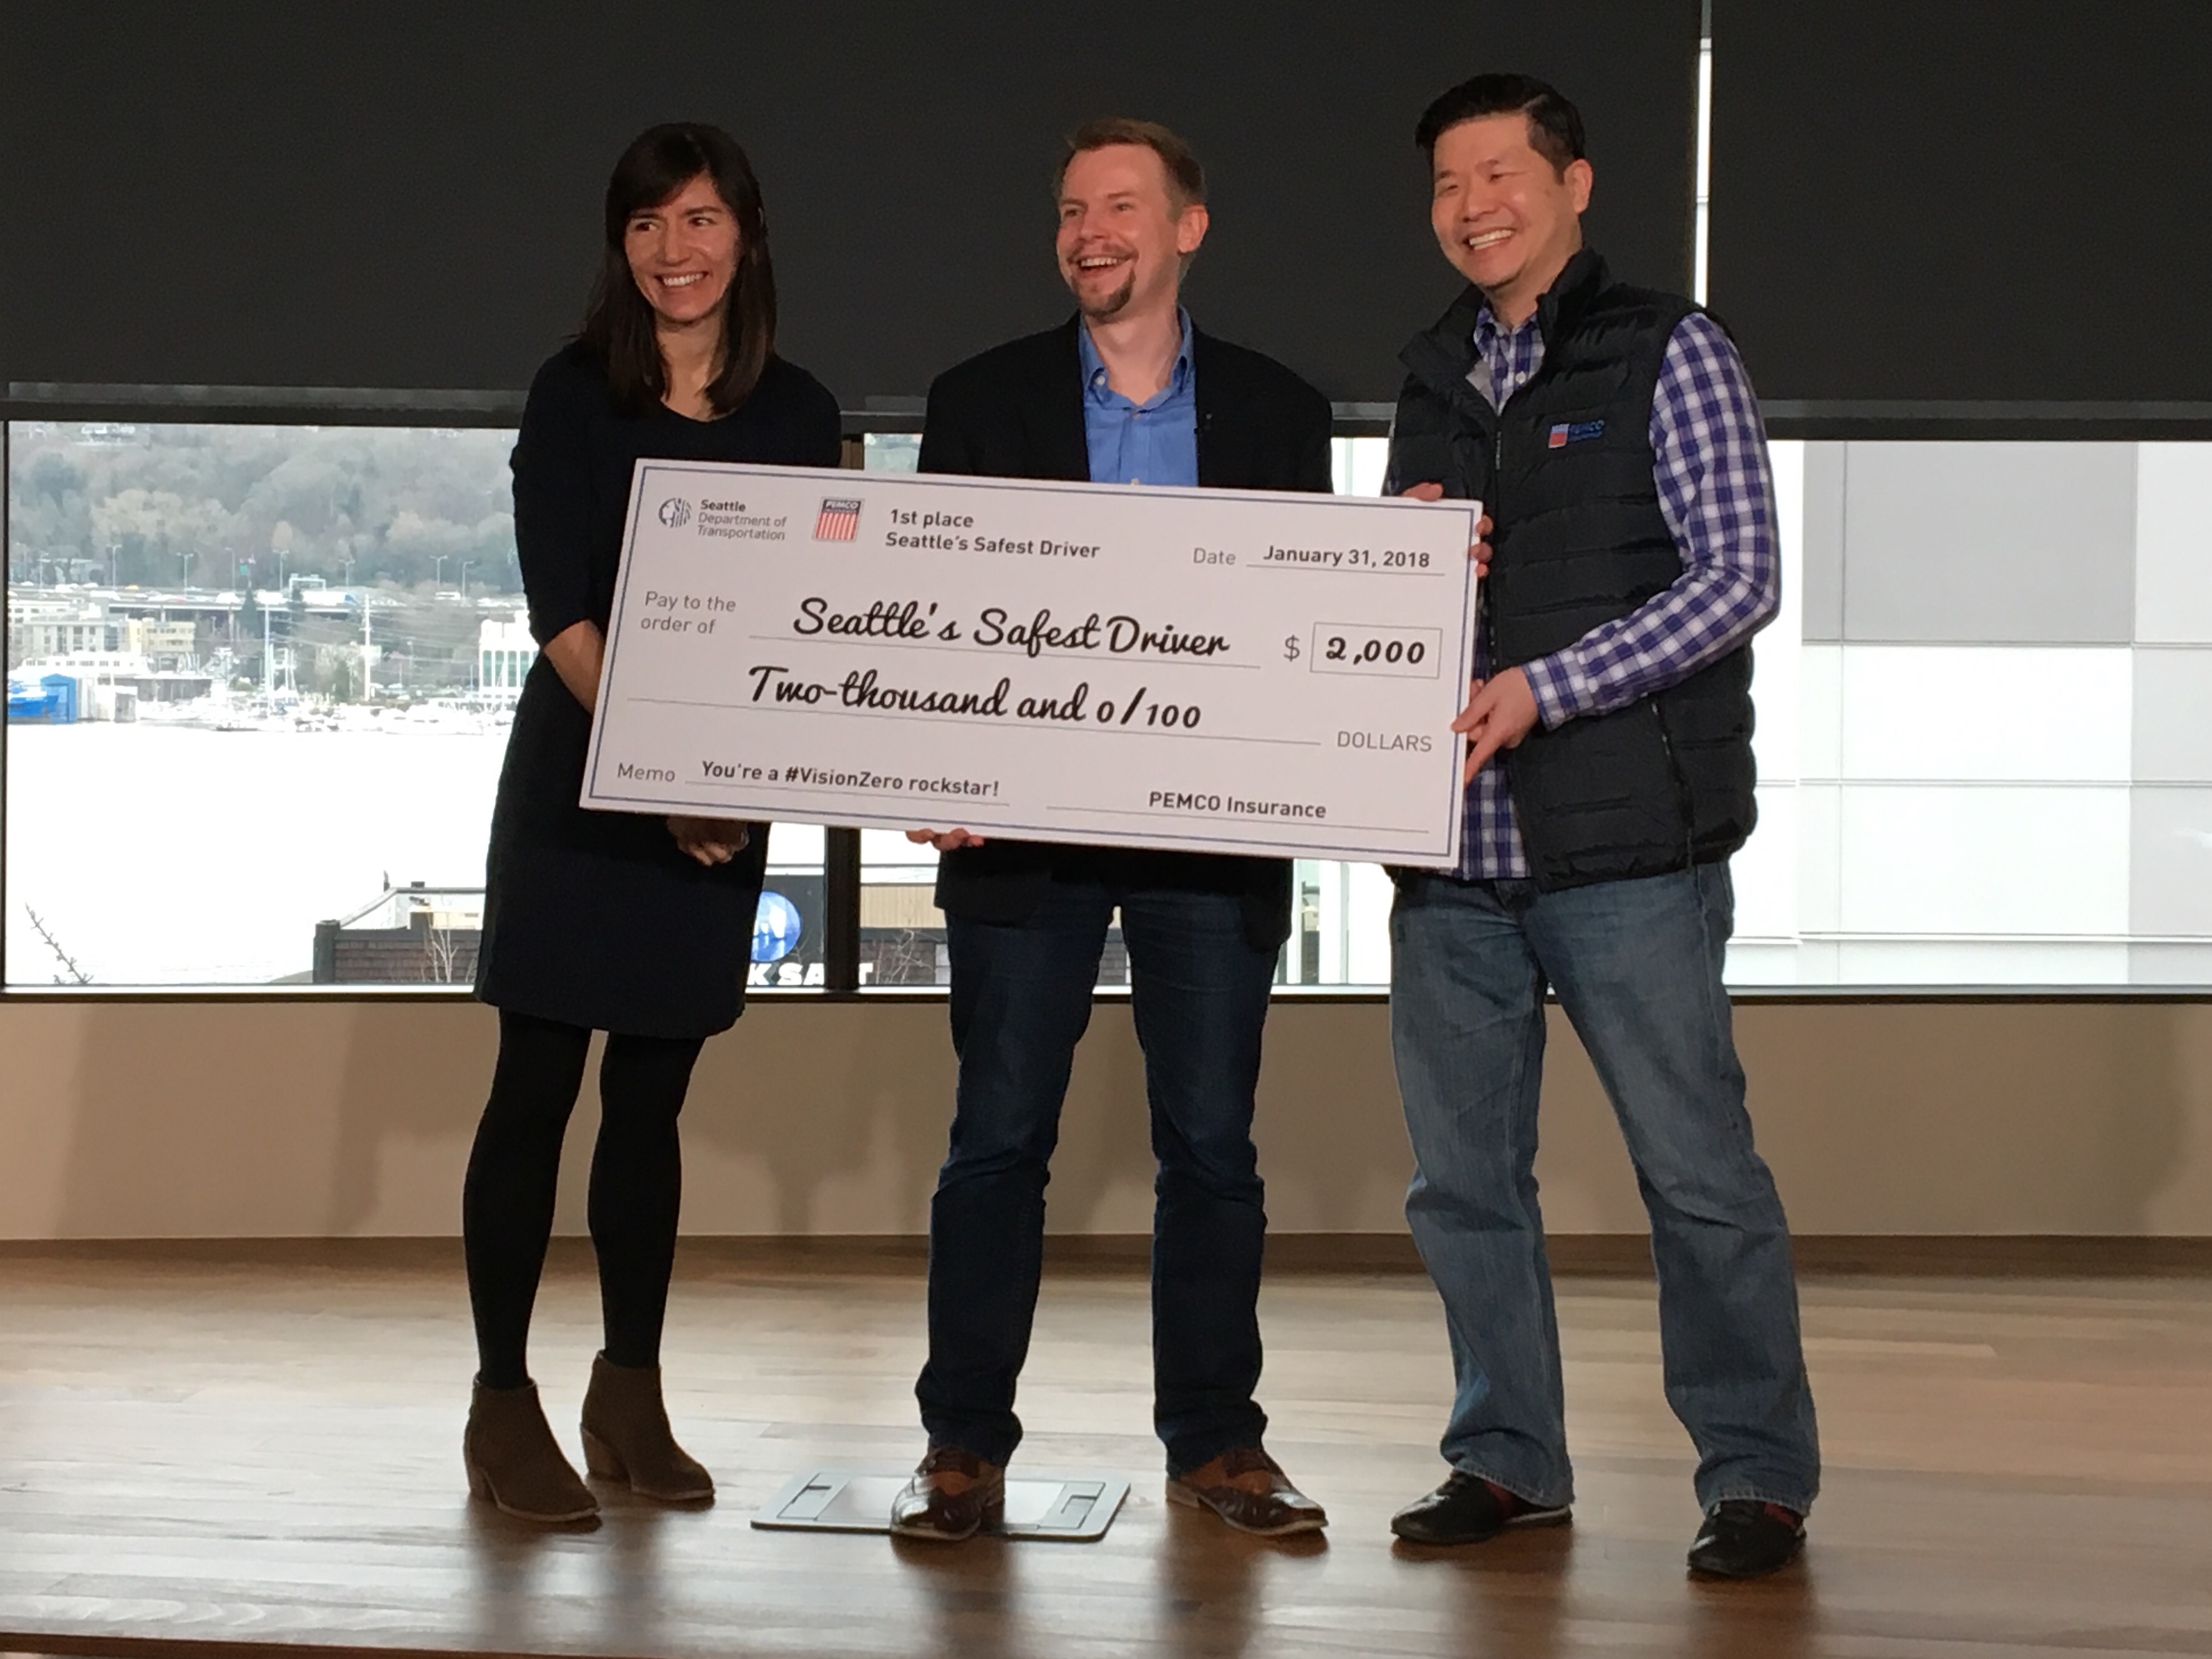 SDOT and PEMCO hand off a giant check to Russell Lebert, Seattle’s Safest Driver